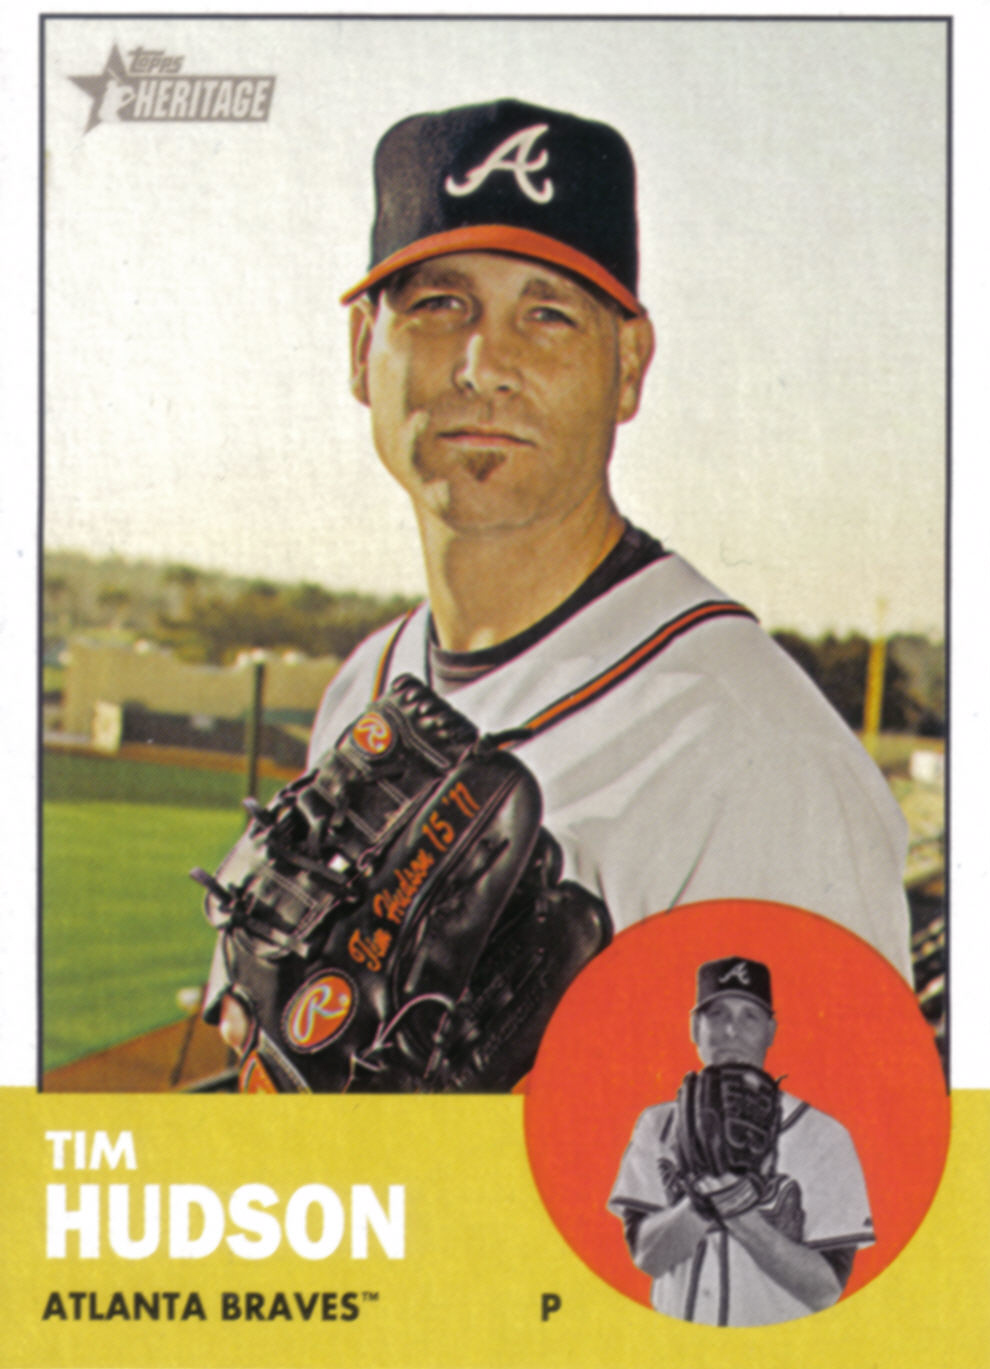 Tubbs Baseball Blog: Tim Hudson, 200 Wins, and The Path To The